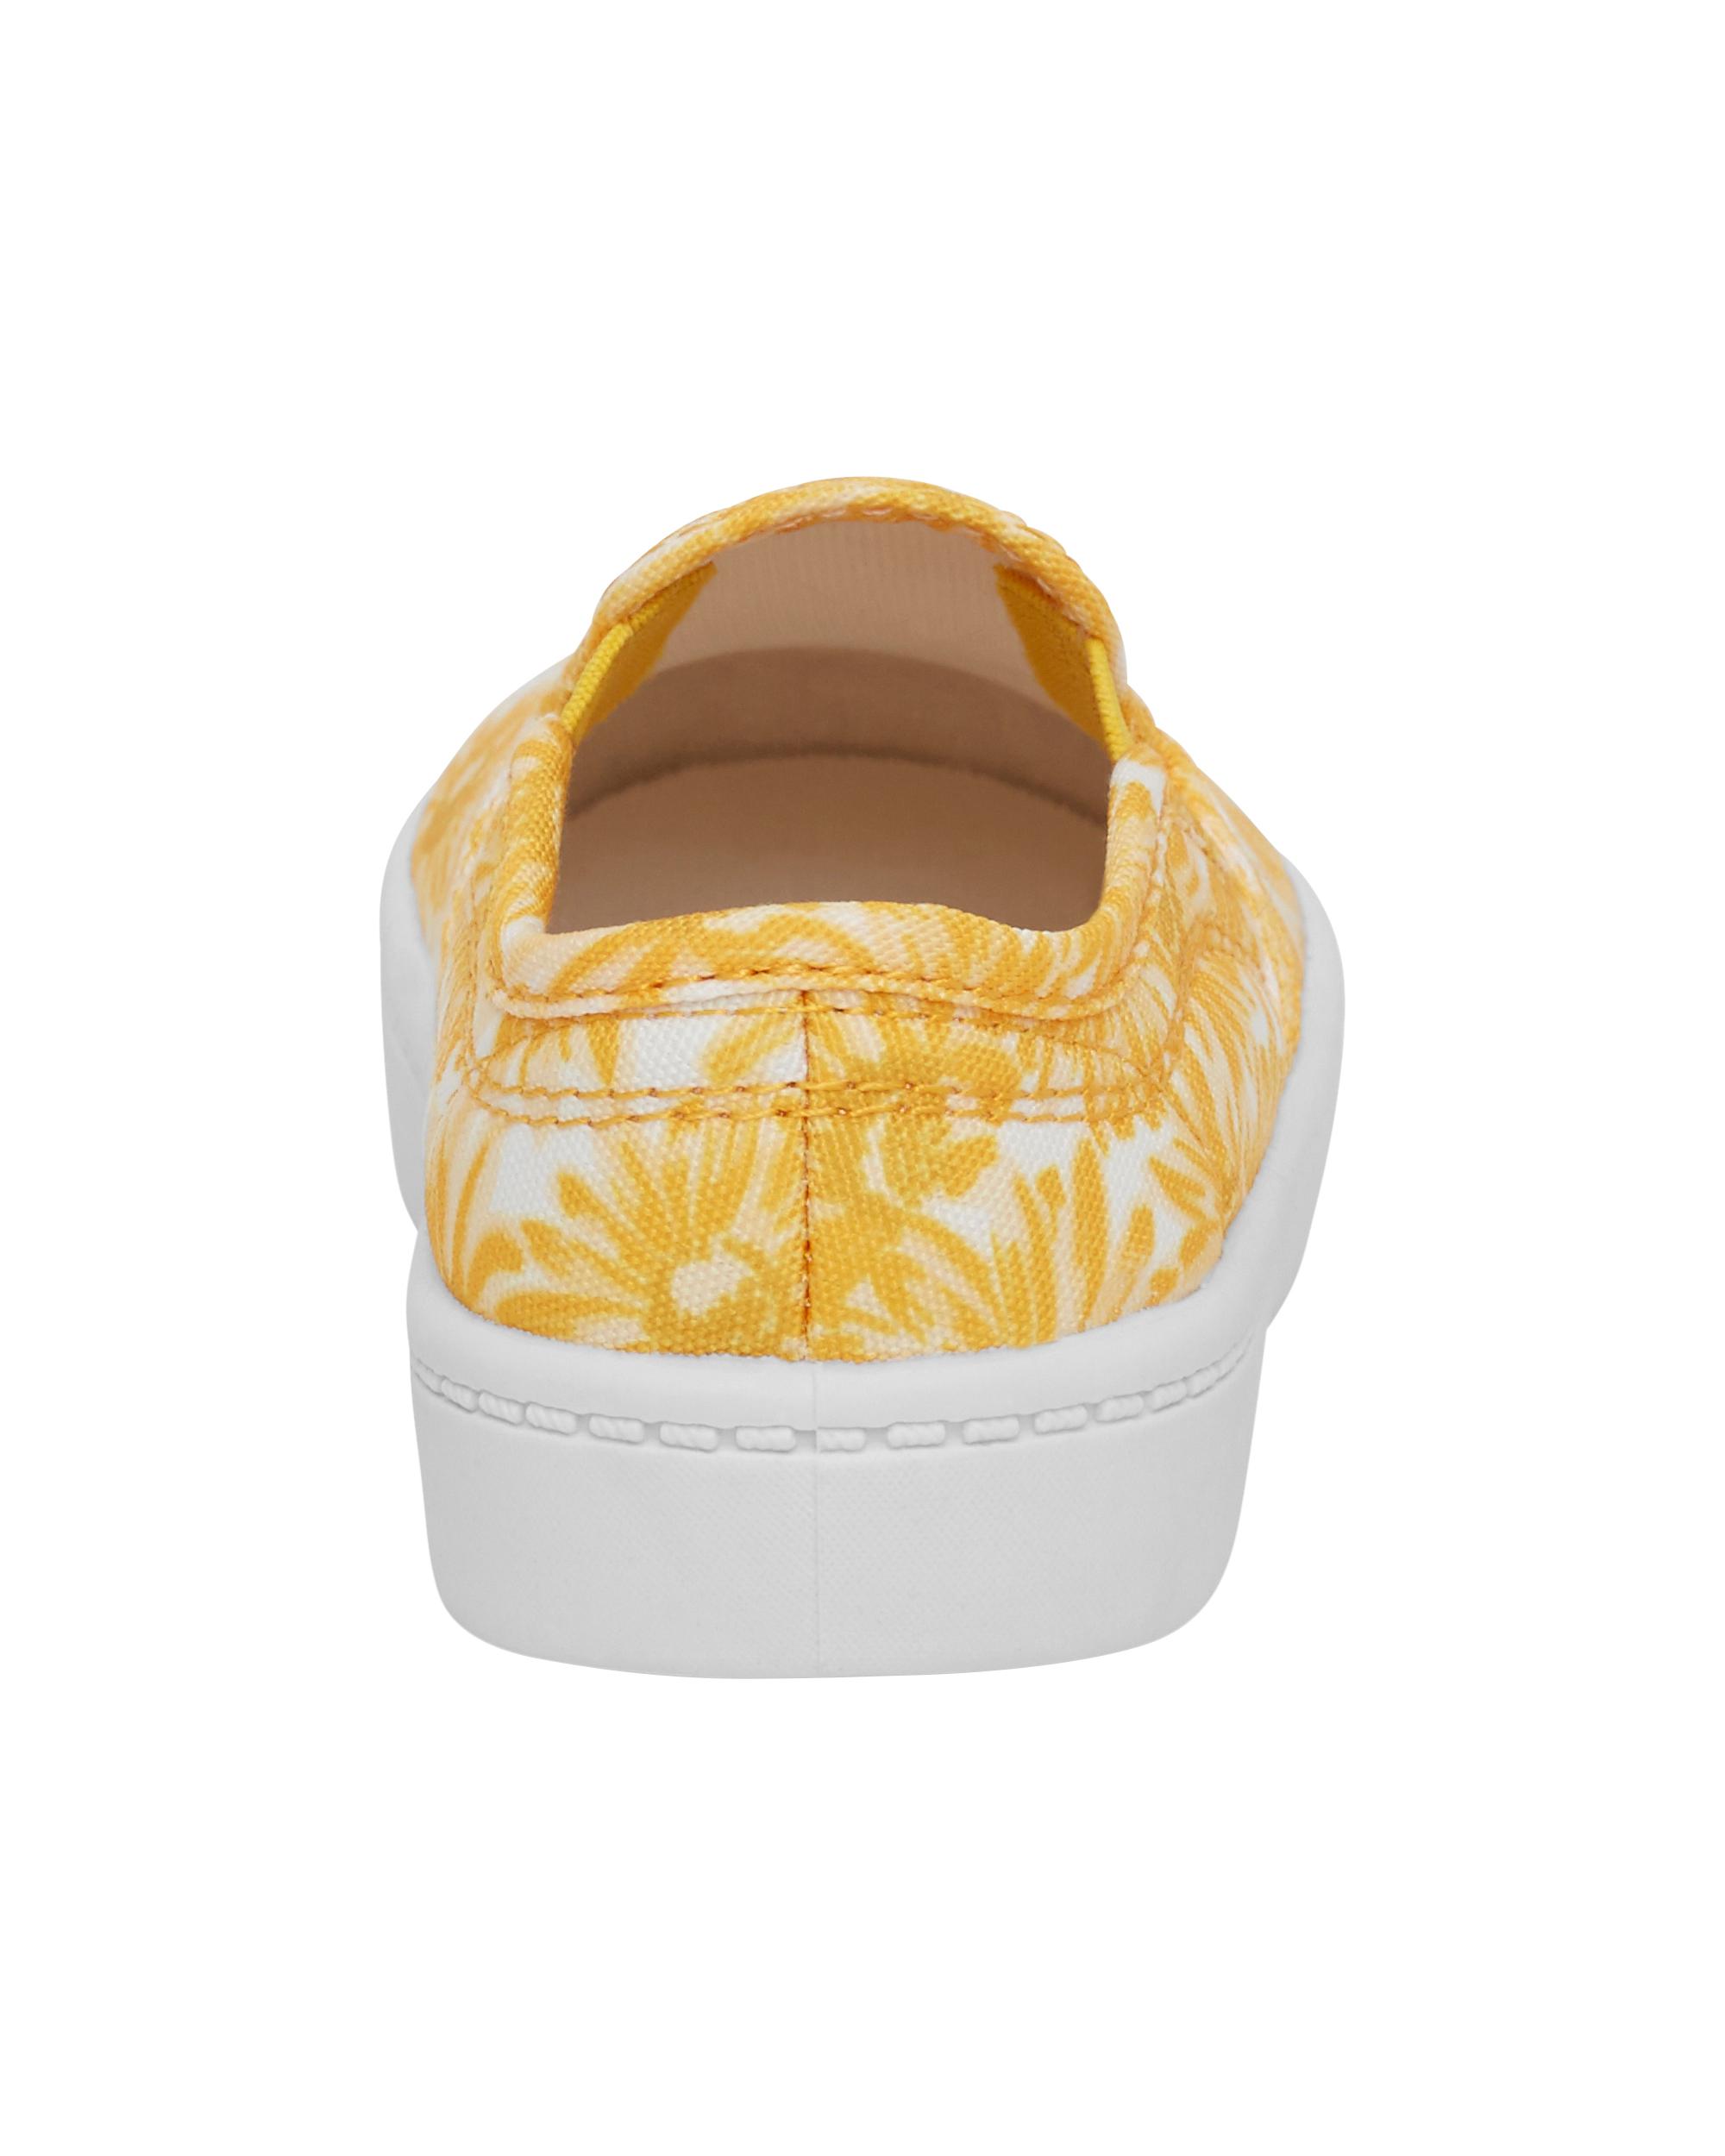 Toddler Sunflower Casual Sneakers